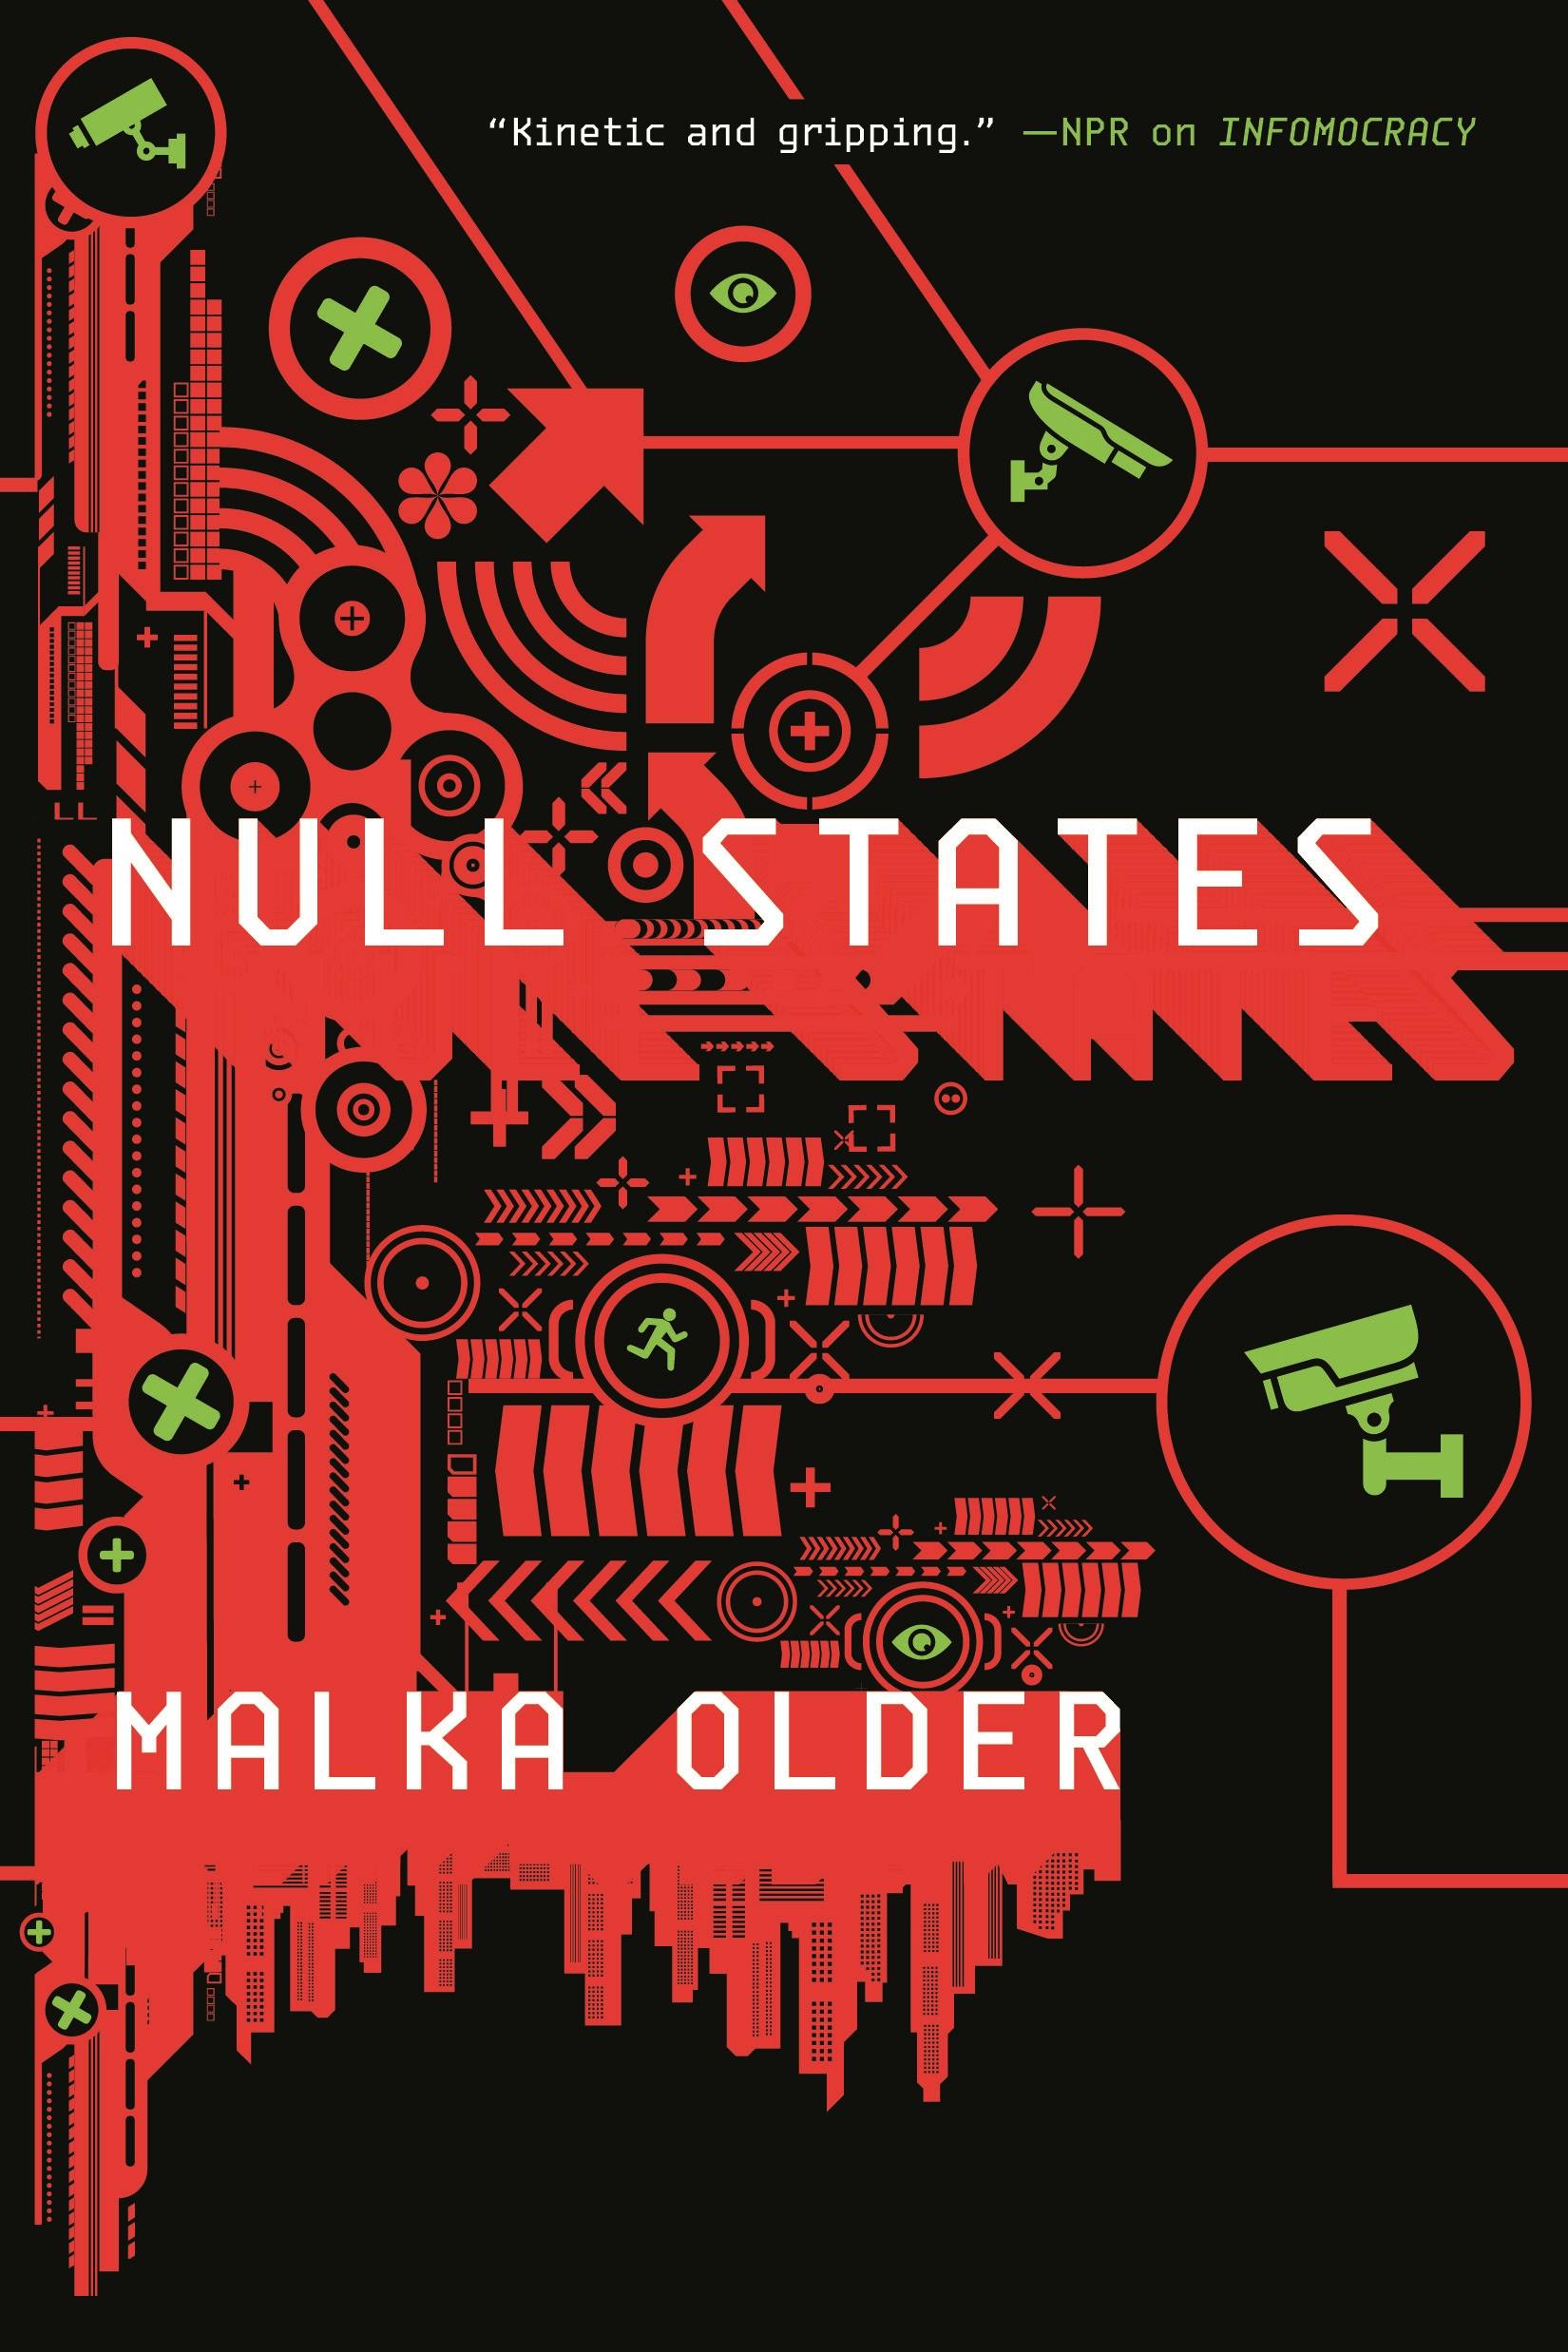 Cover for the book titled as: Null States